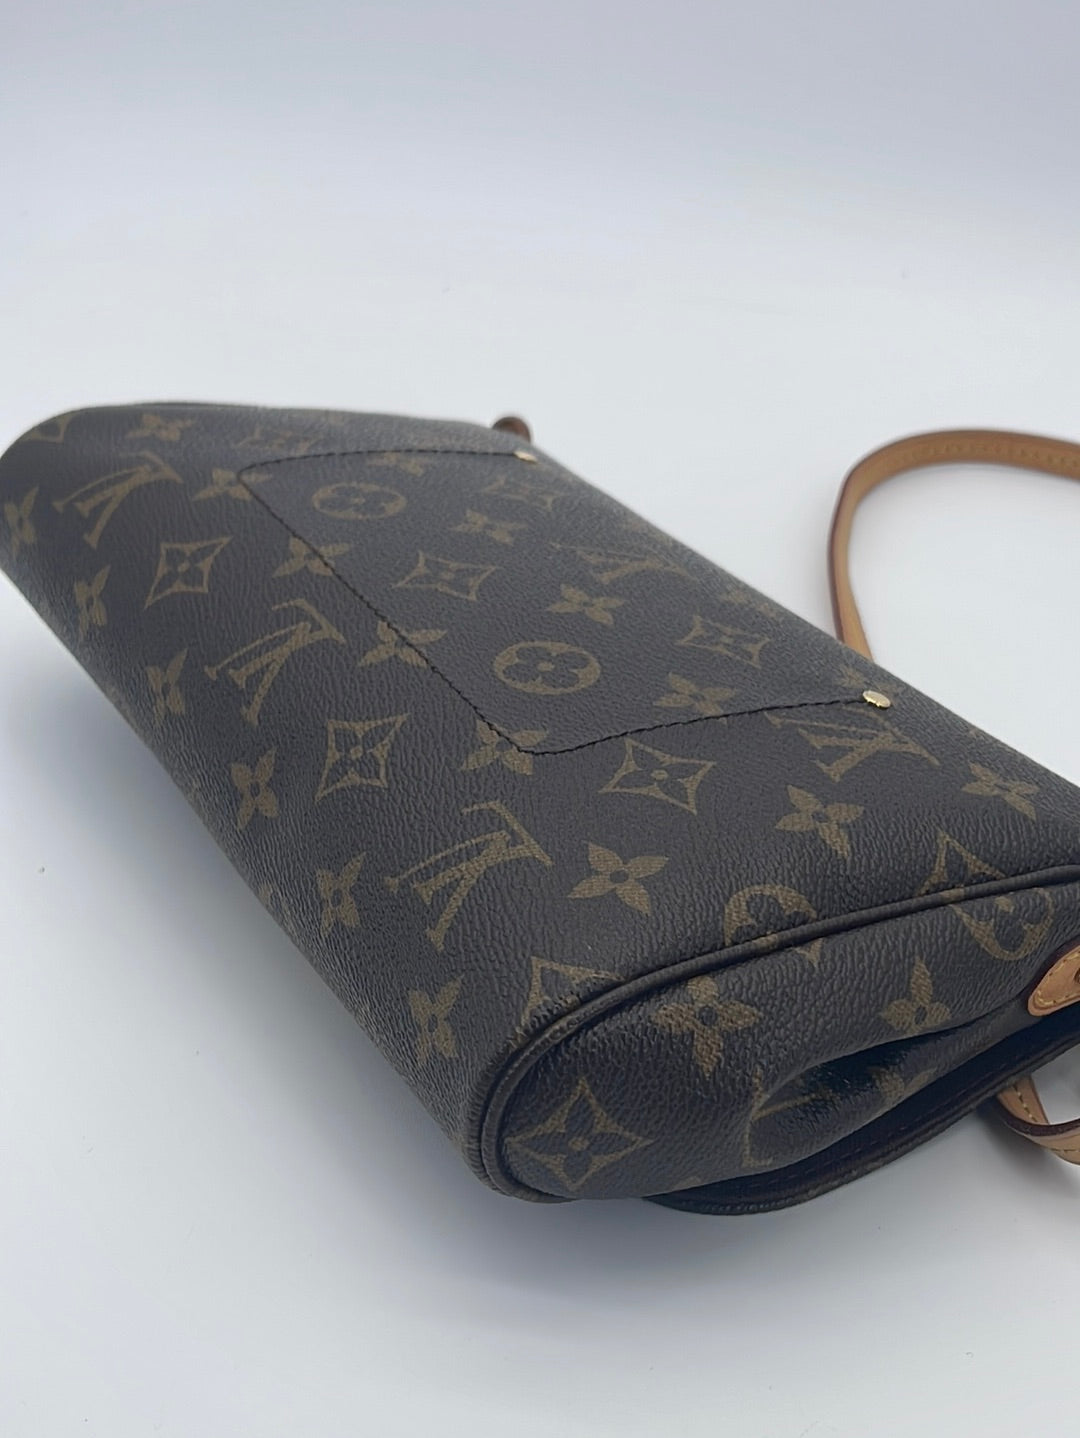 Alternatives to the DISCONTINUED Louis Vuitton MM Favorite